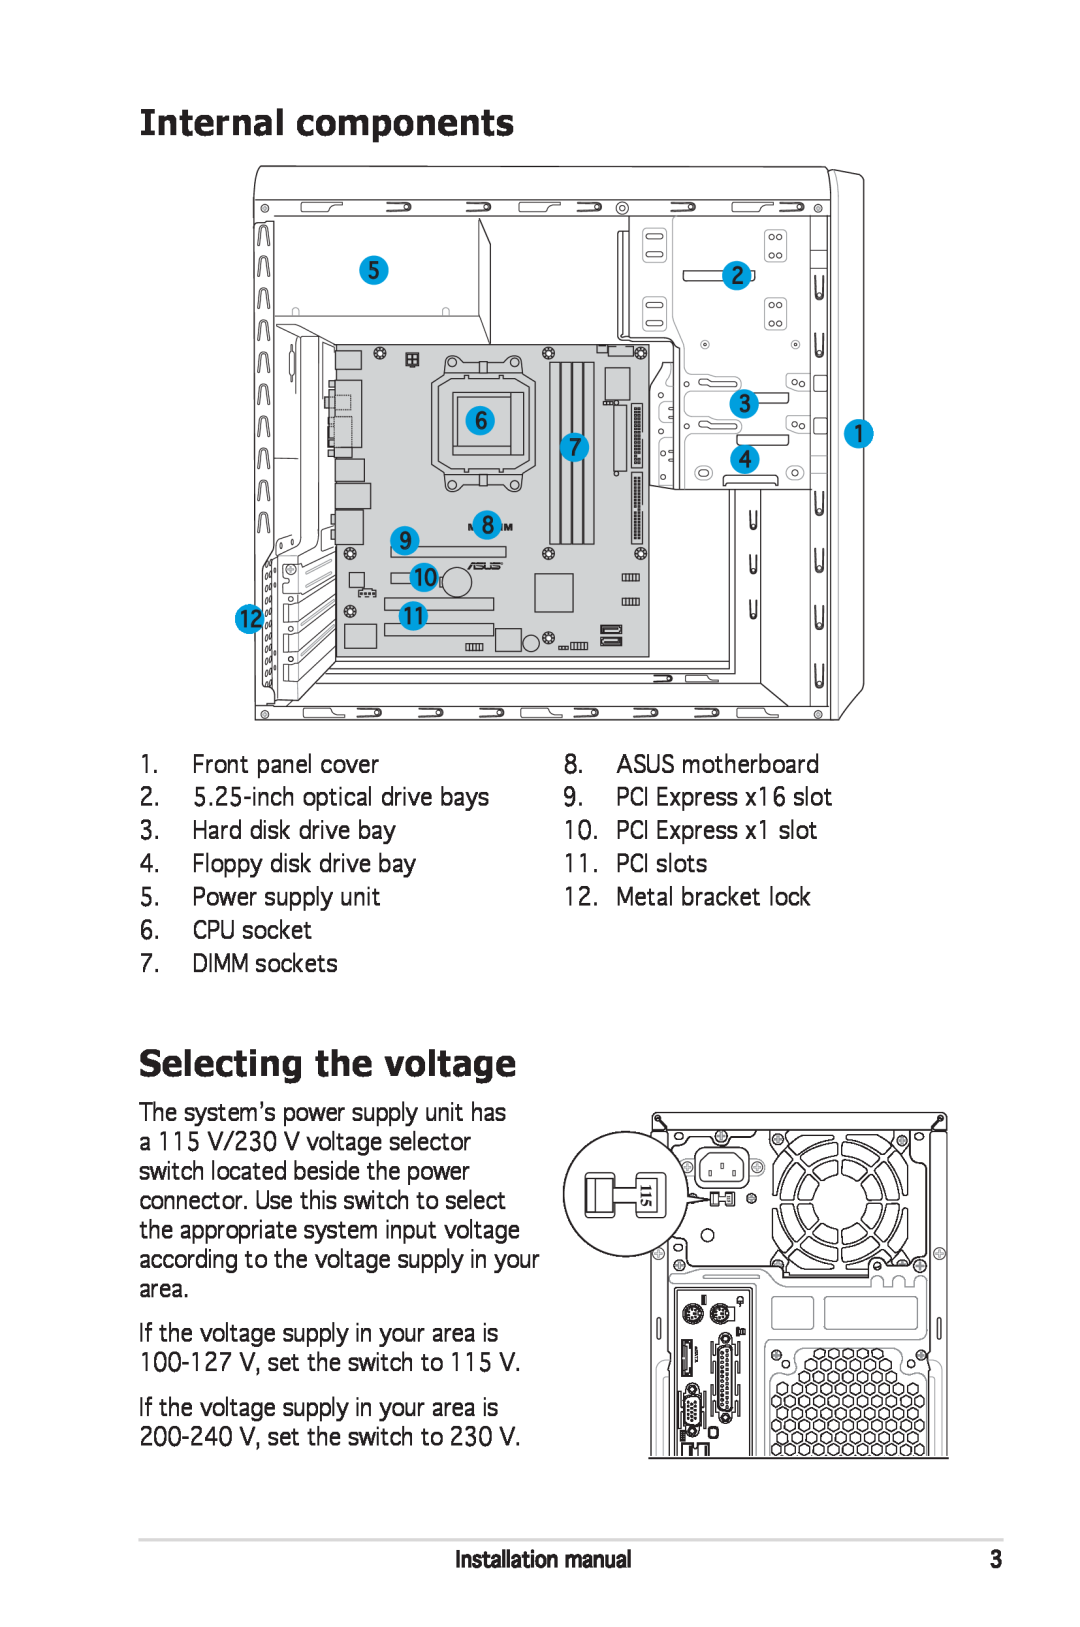 Asus M2NC61S installation manual Internal components, Selecting the voltage 